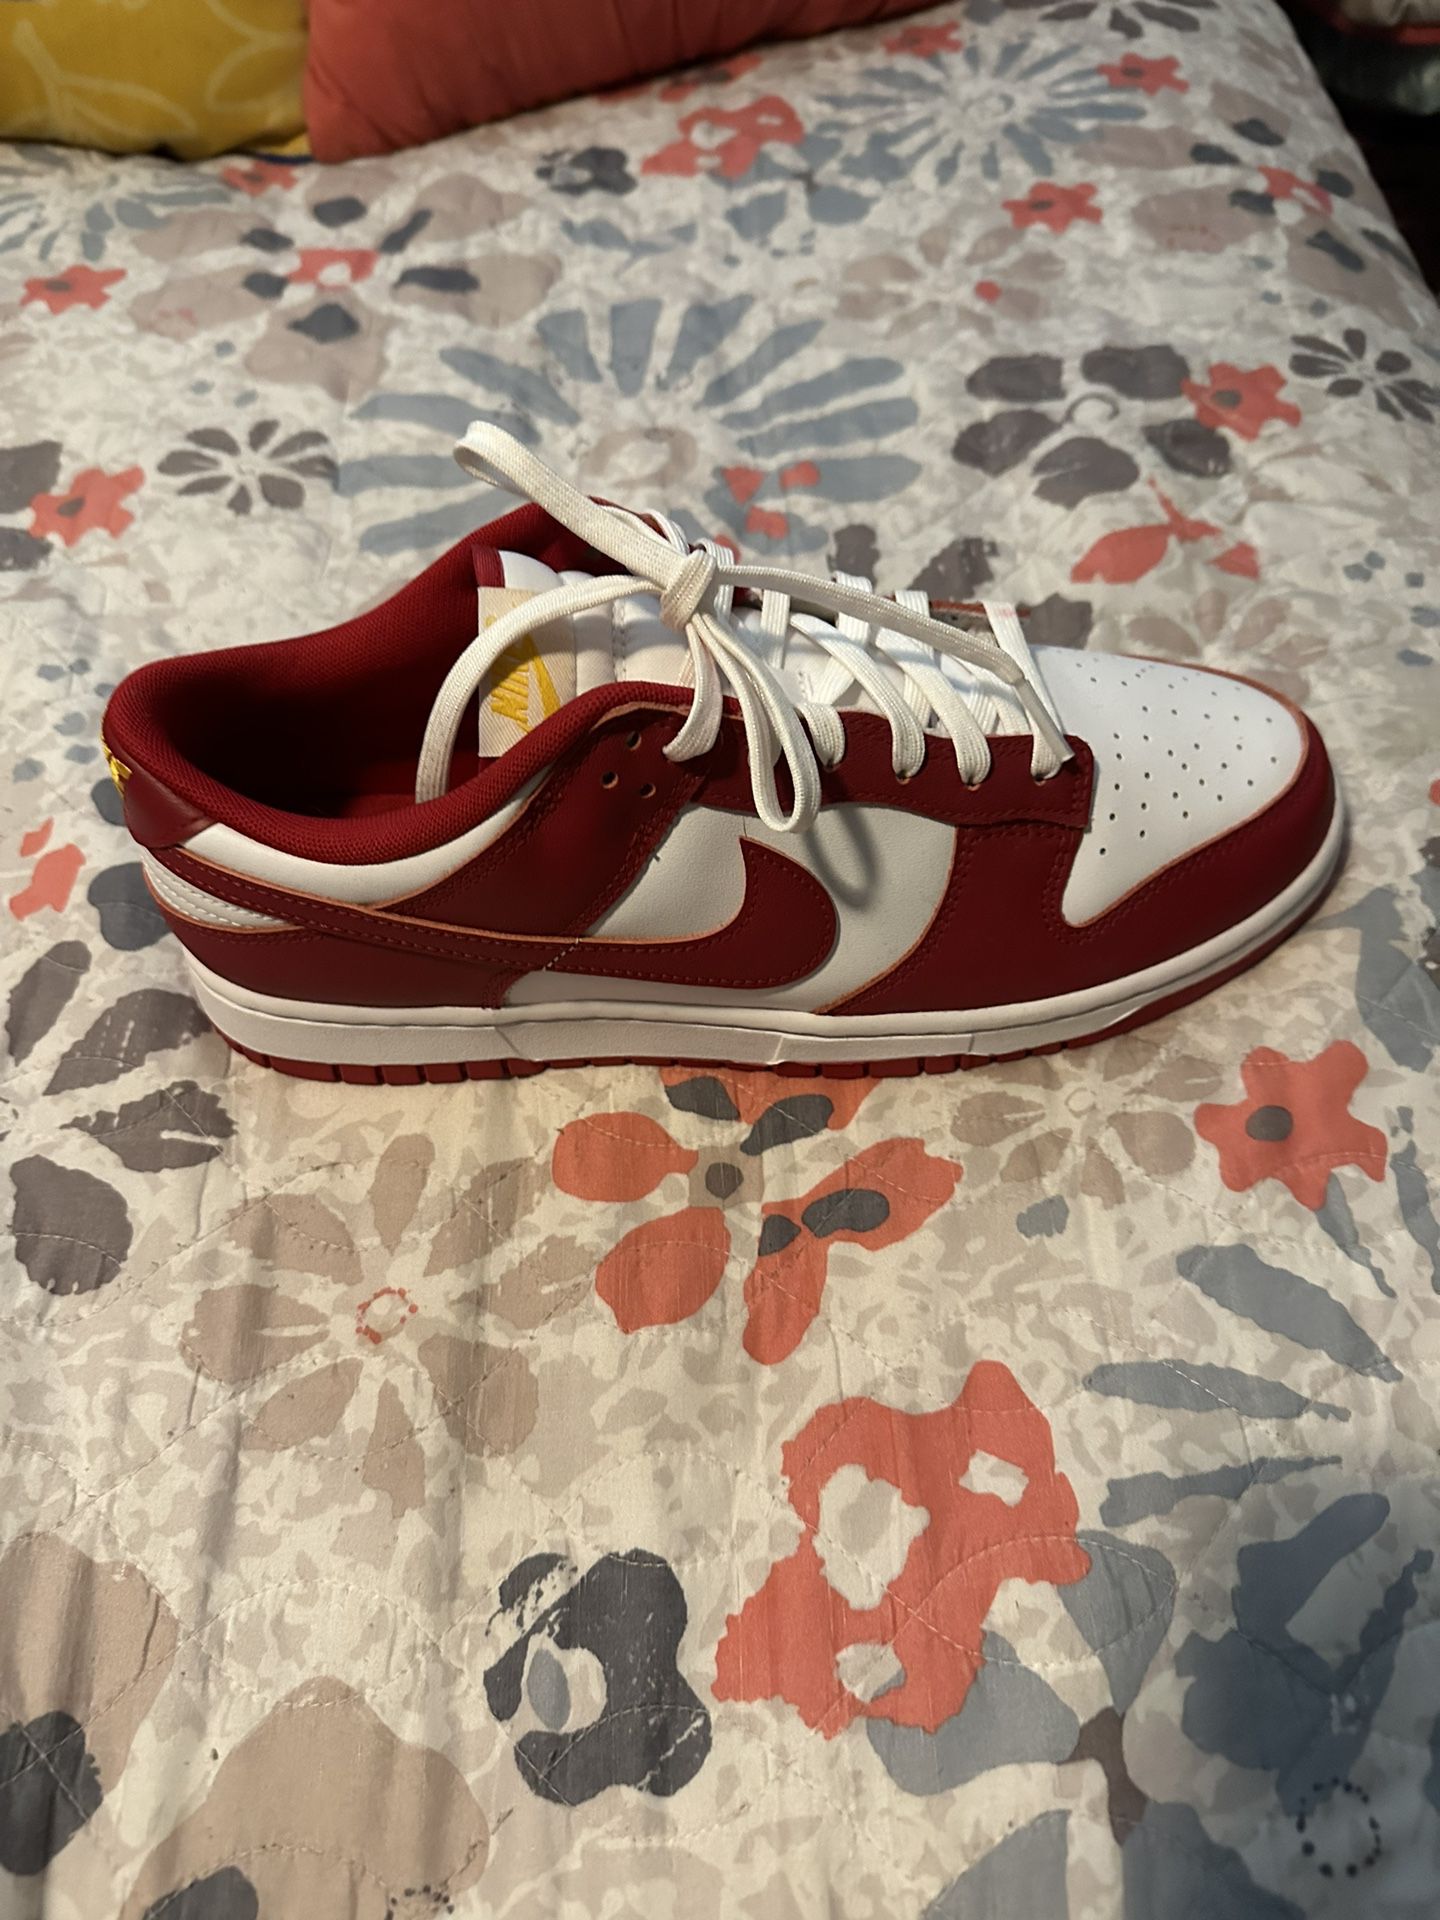 Nike Dunk USC Sz 11 DS Brand New 100% Authentic Nike Product 